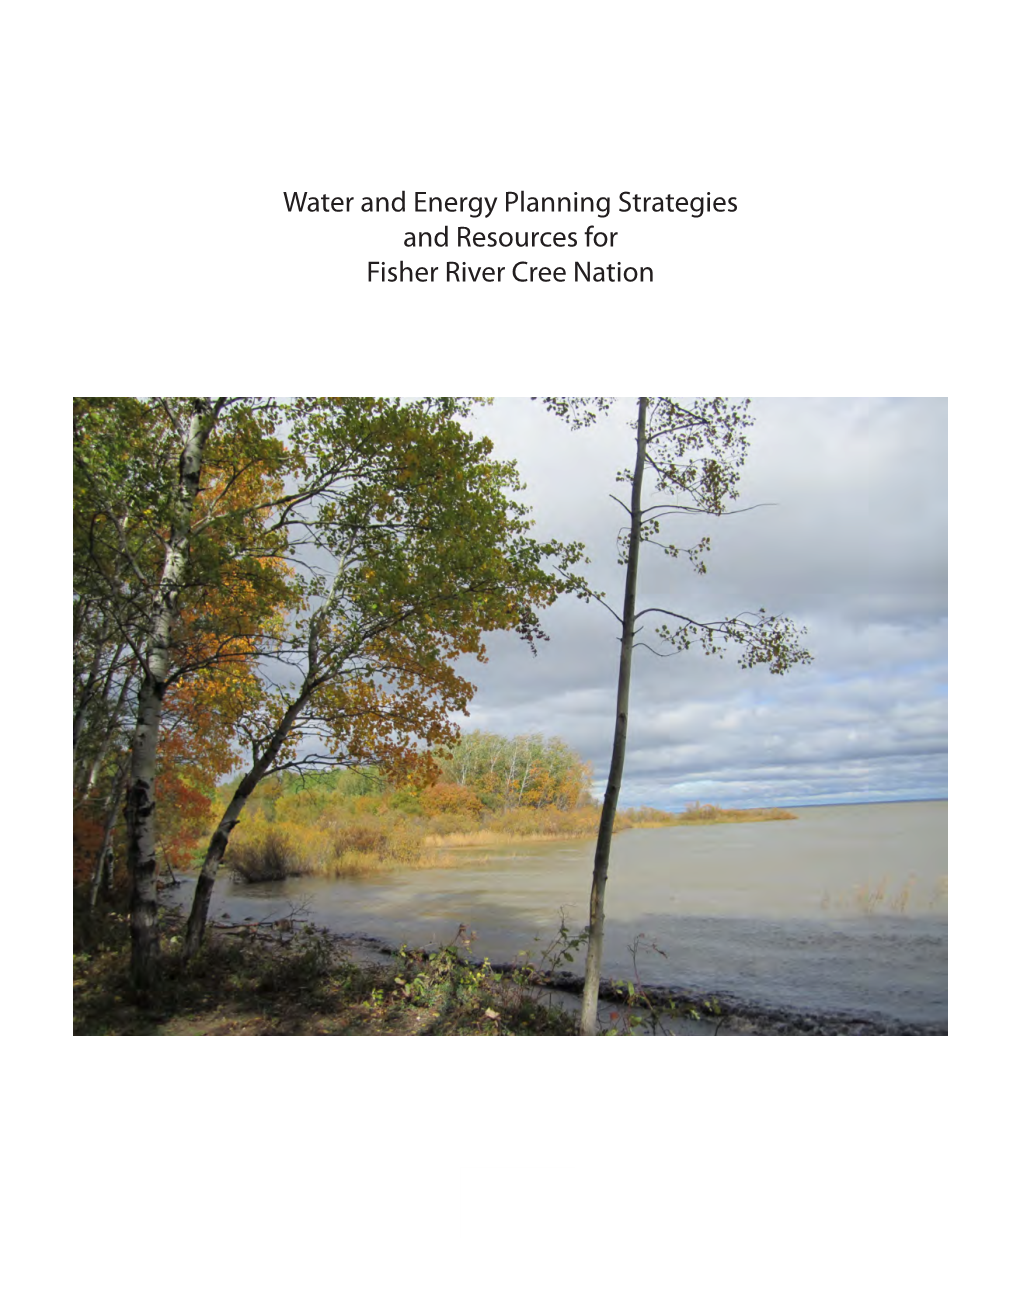 Water and Energy Planning Strategies and Resources for Fisher River Cree Nation